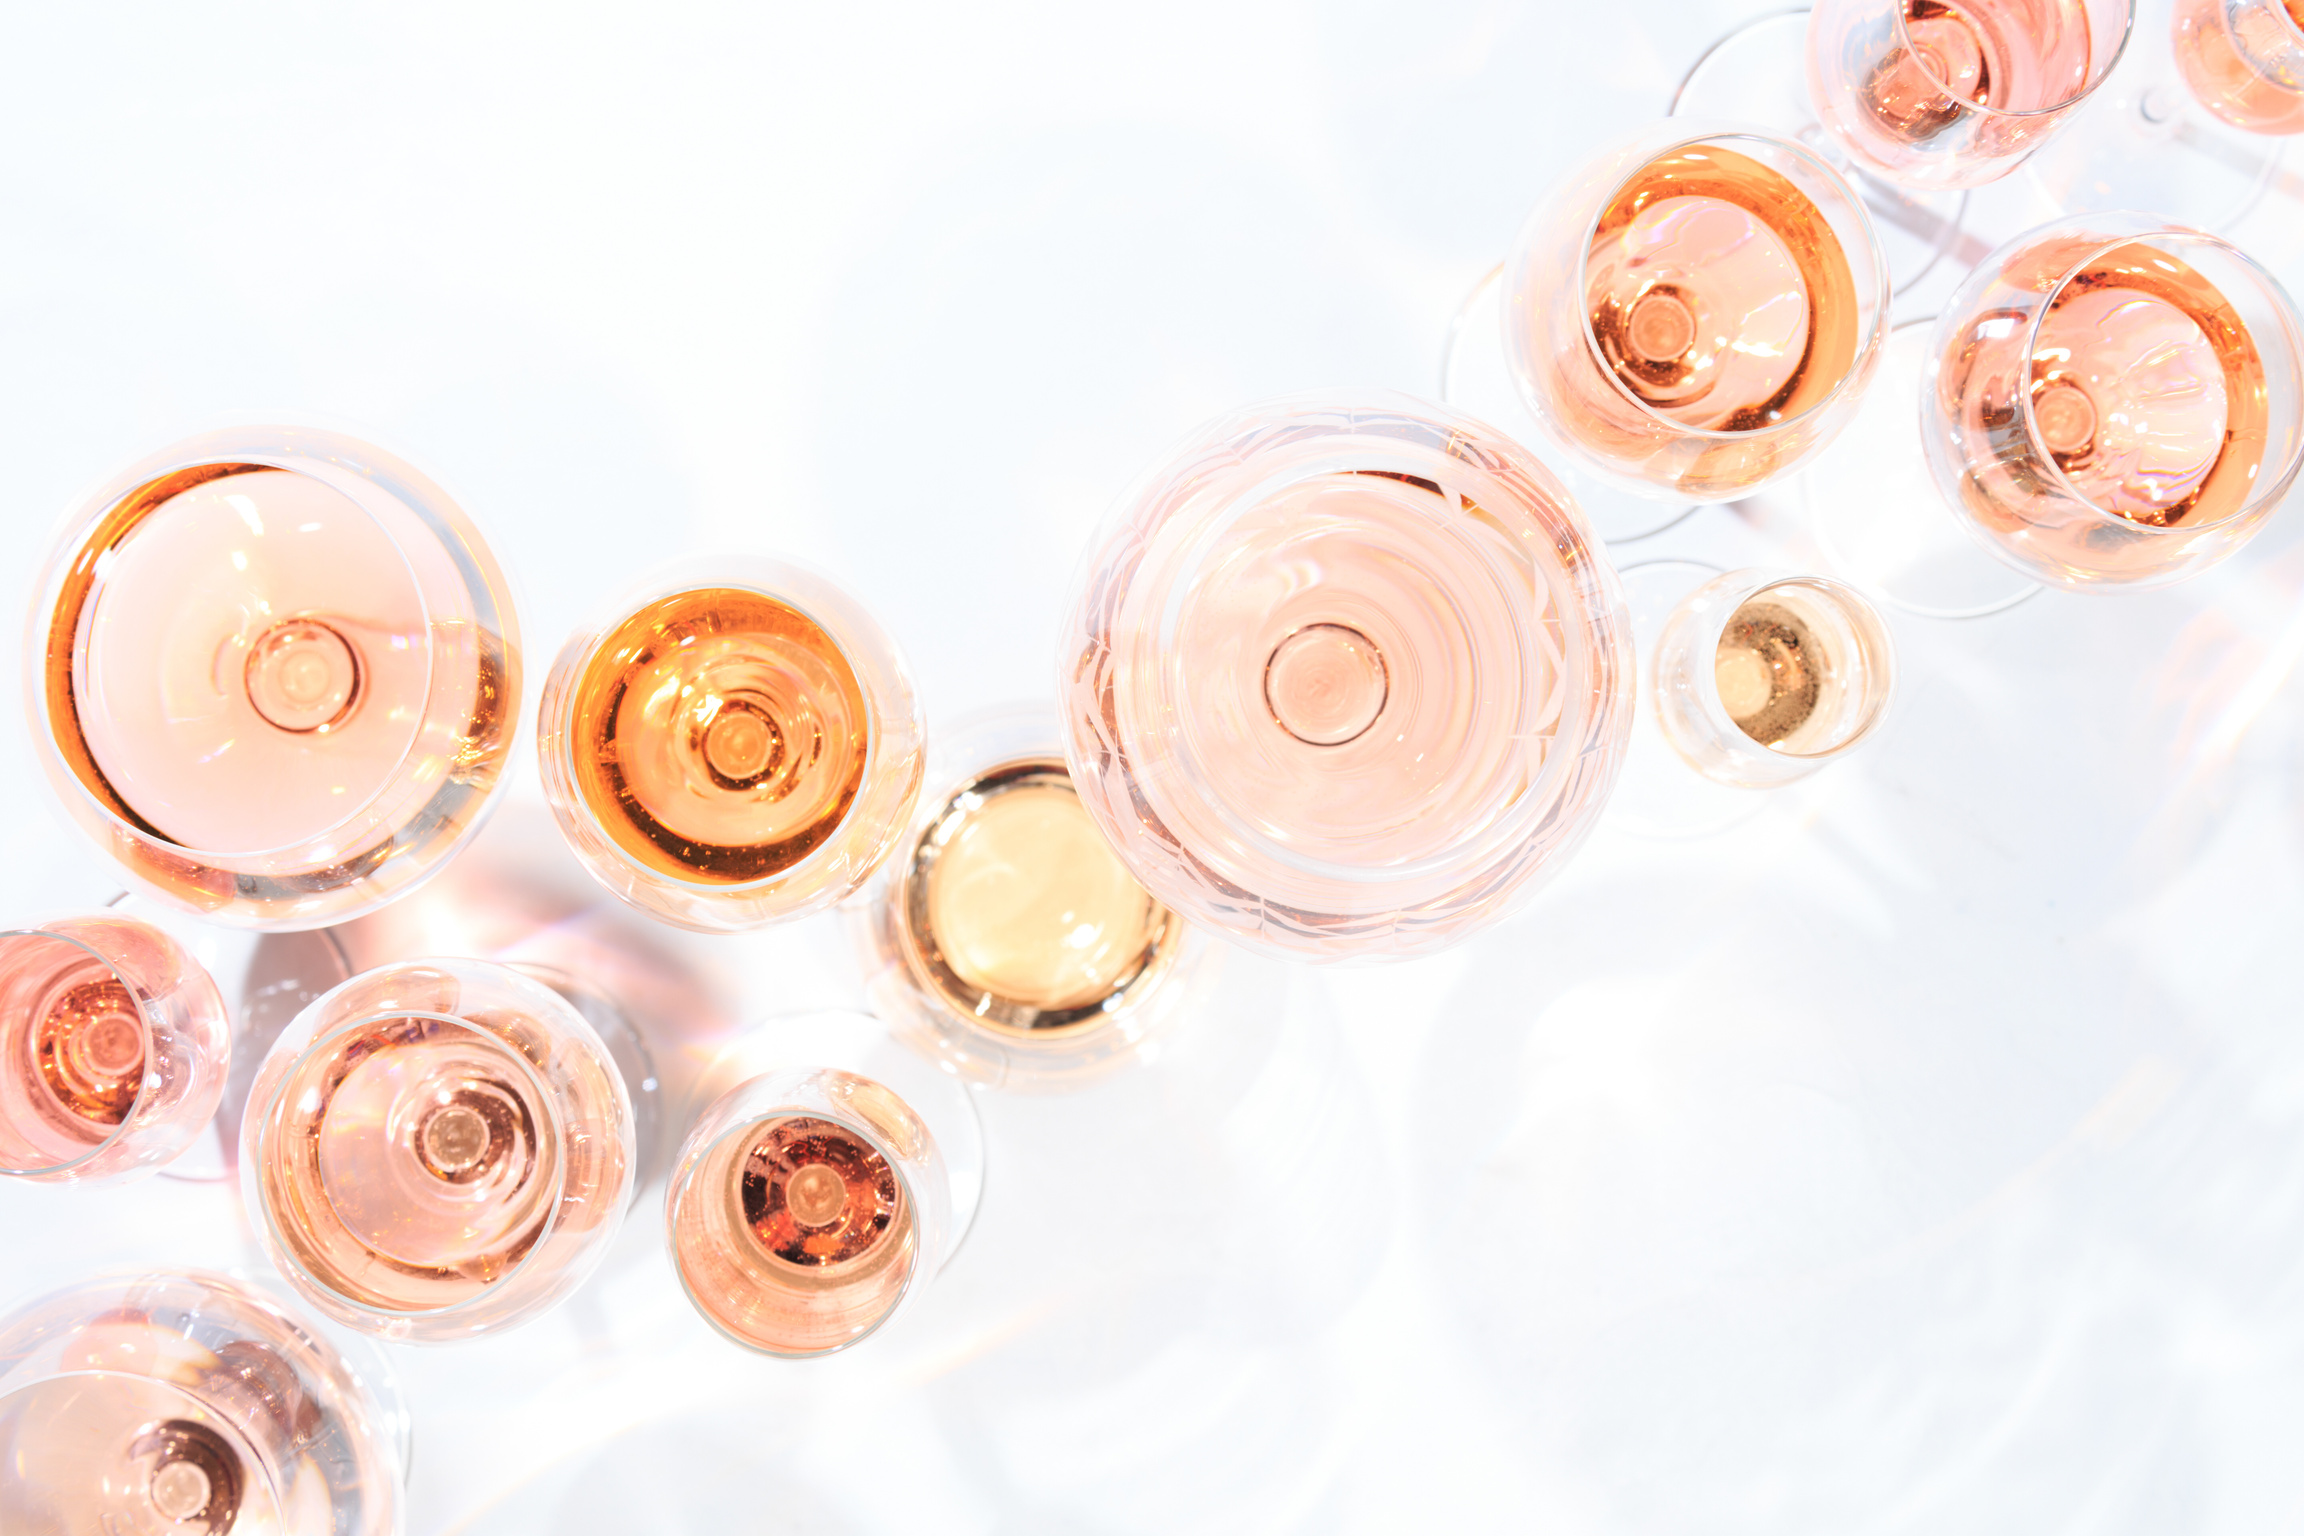 Many glasses of rose wine at wine tasting Concept of rose wine and